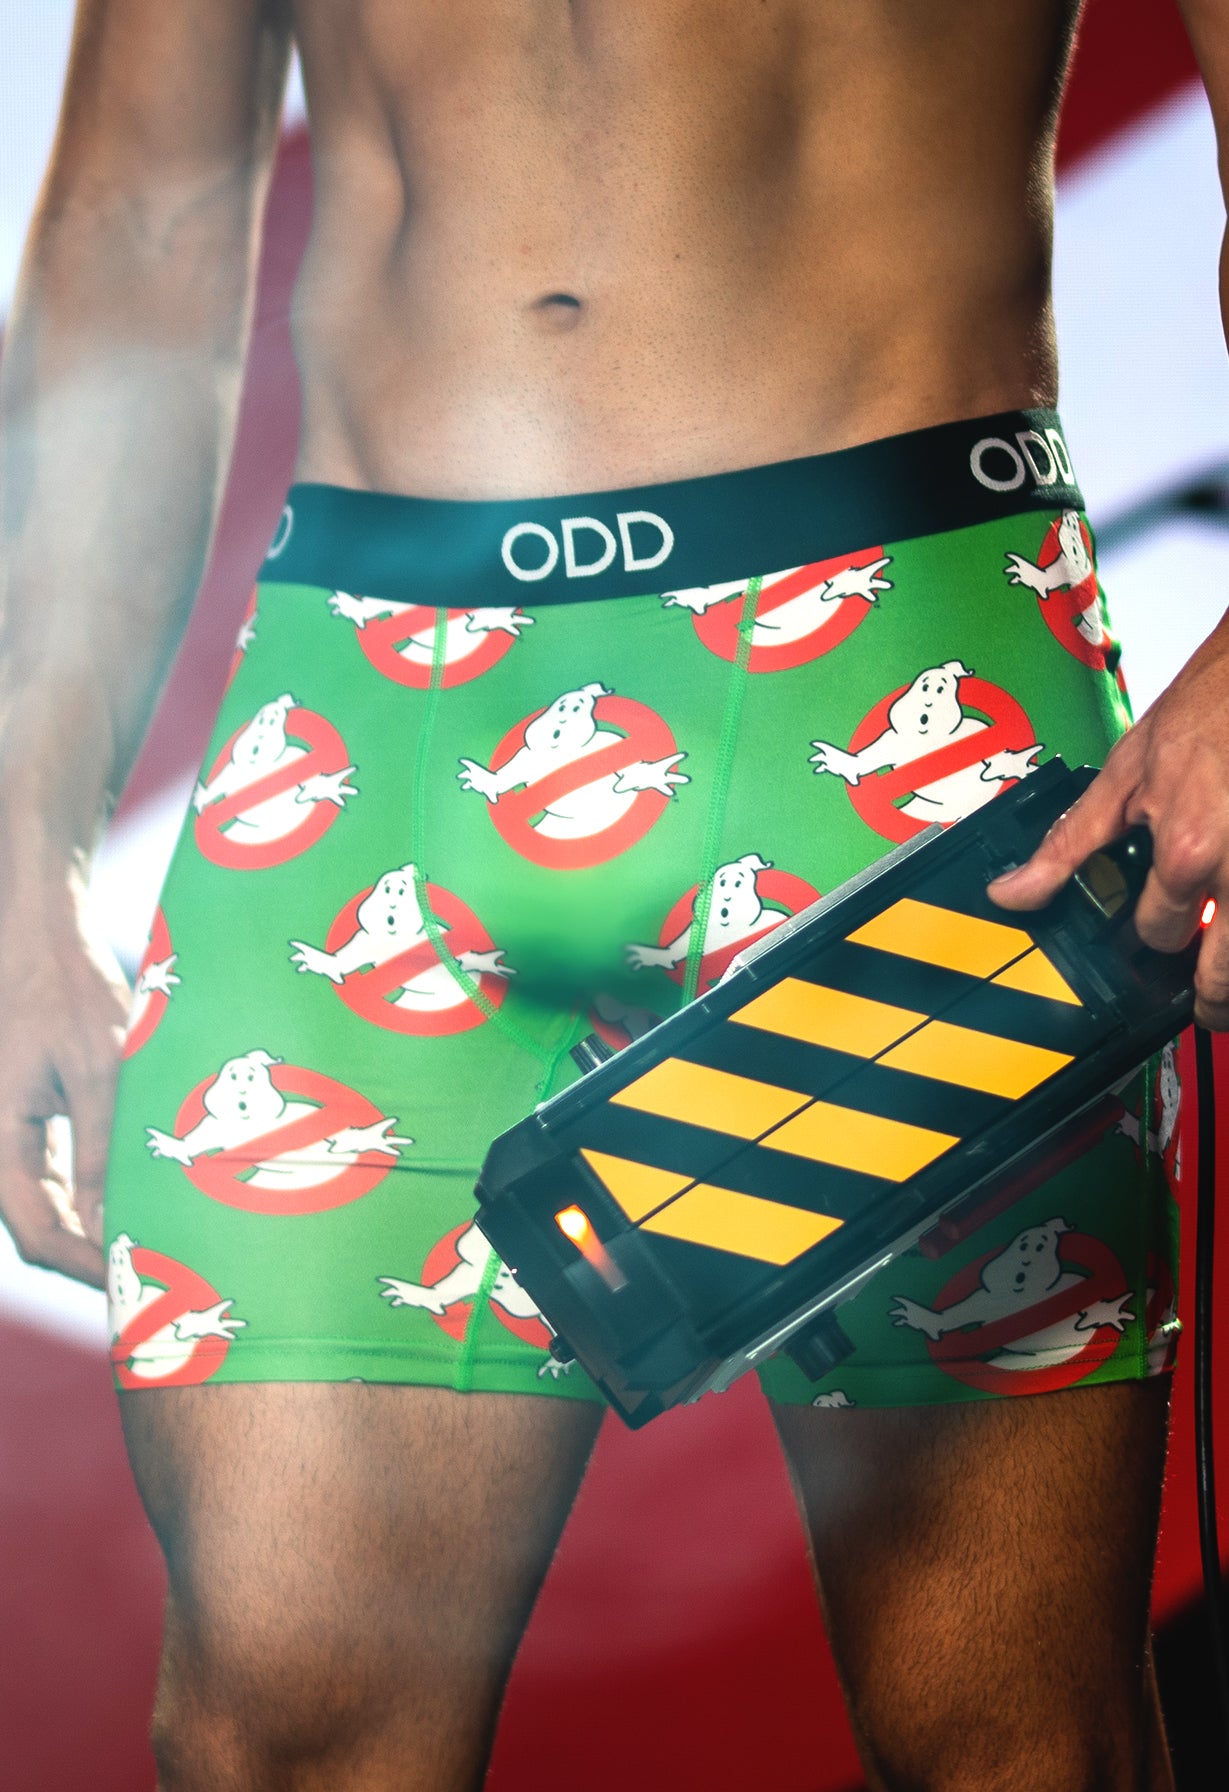 Ghostbusters Slime Drip Boxer Briefs by Odd Sox Canada